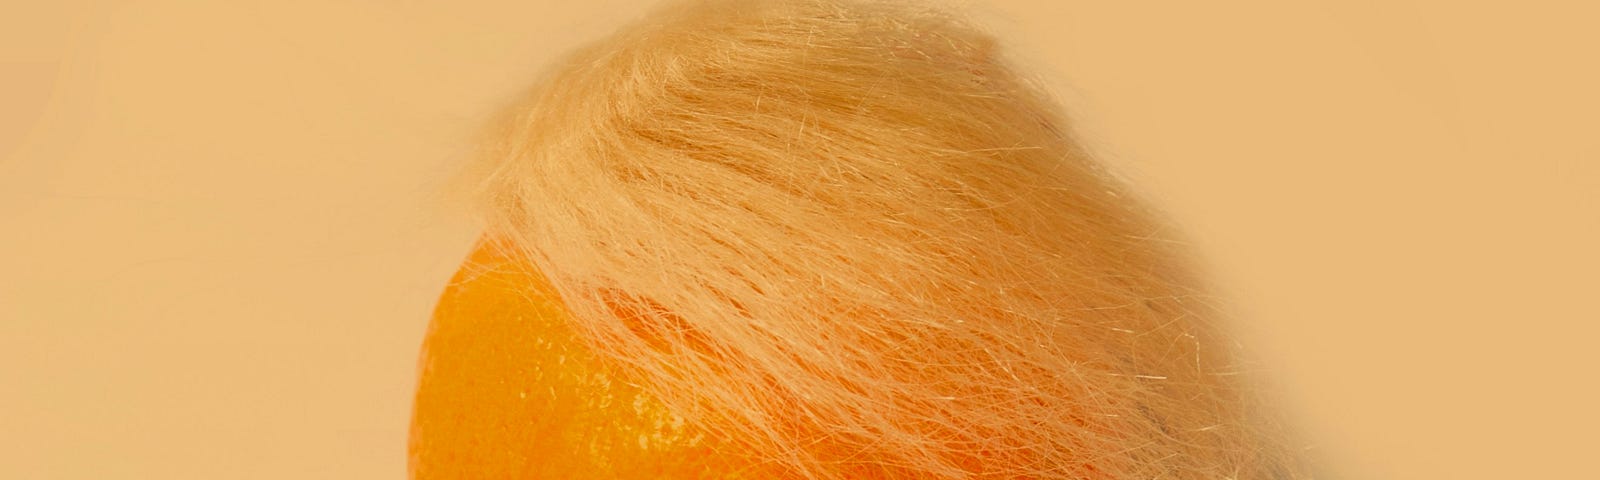 Photo of an orange with hair.